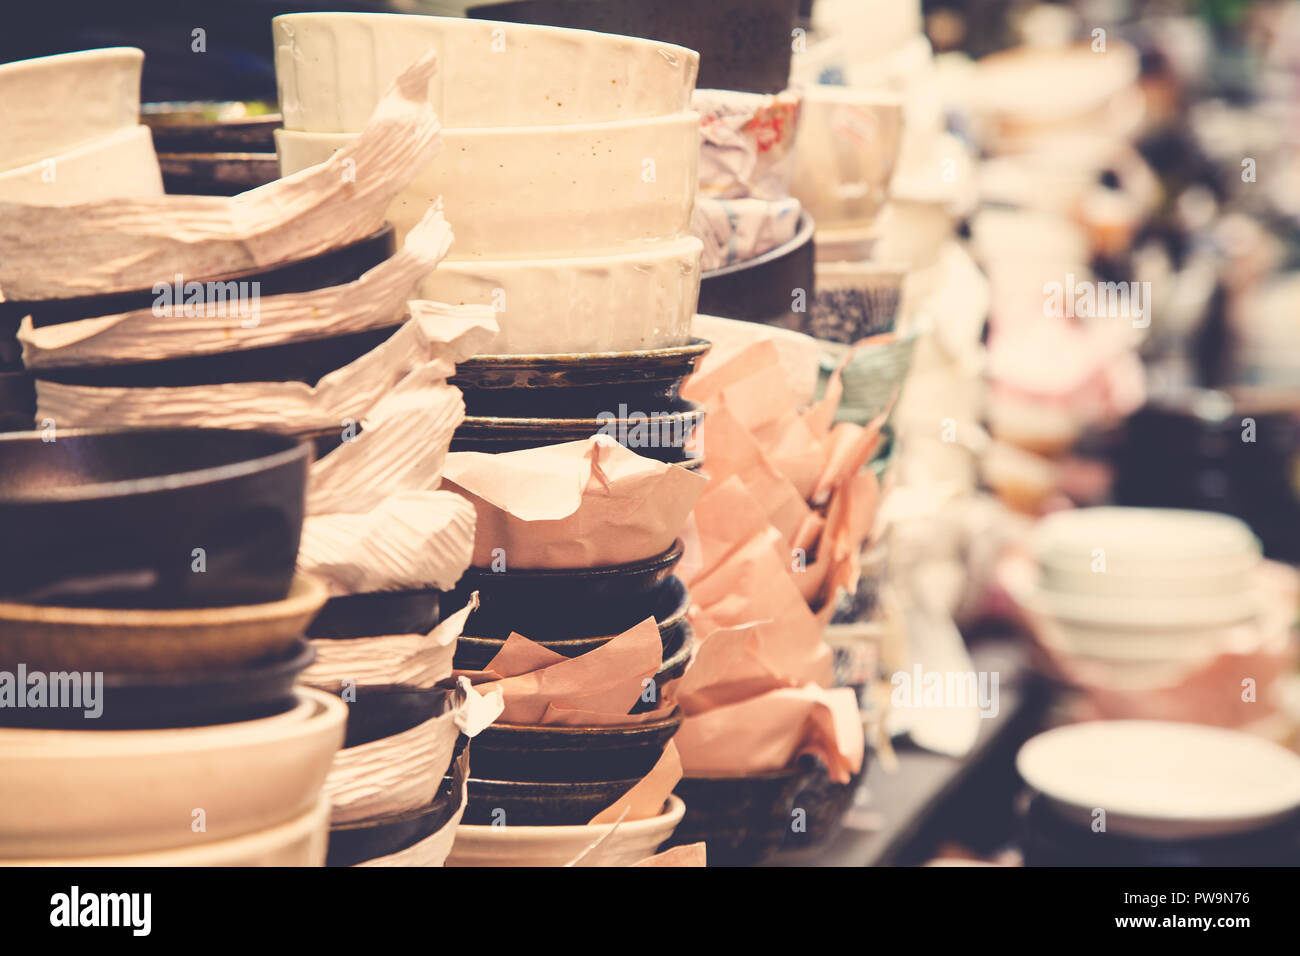 Japanese food bowls and tableware for sale at a market in Osaka, Japan. Retro style filter applied. Stock Photo